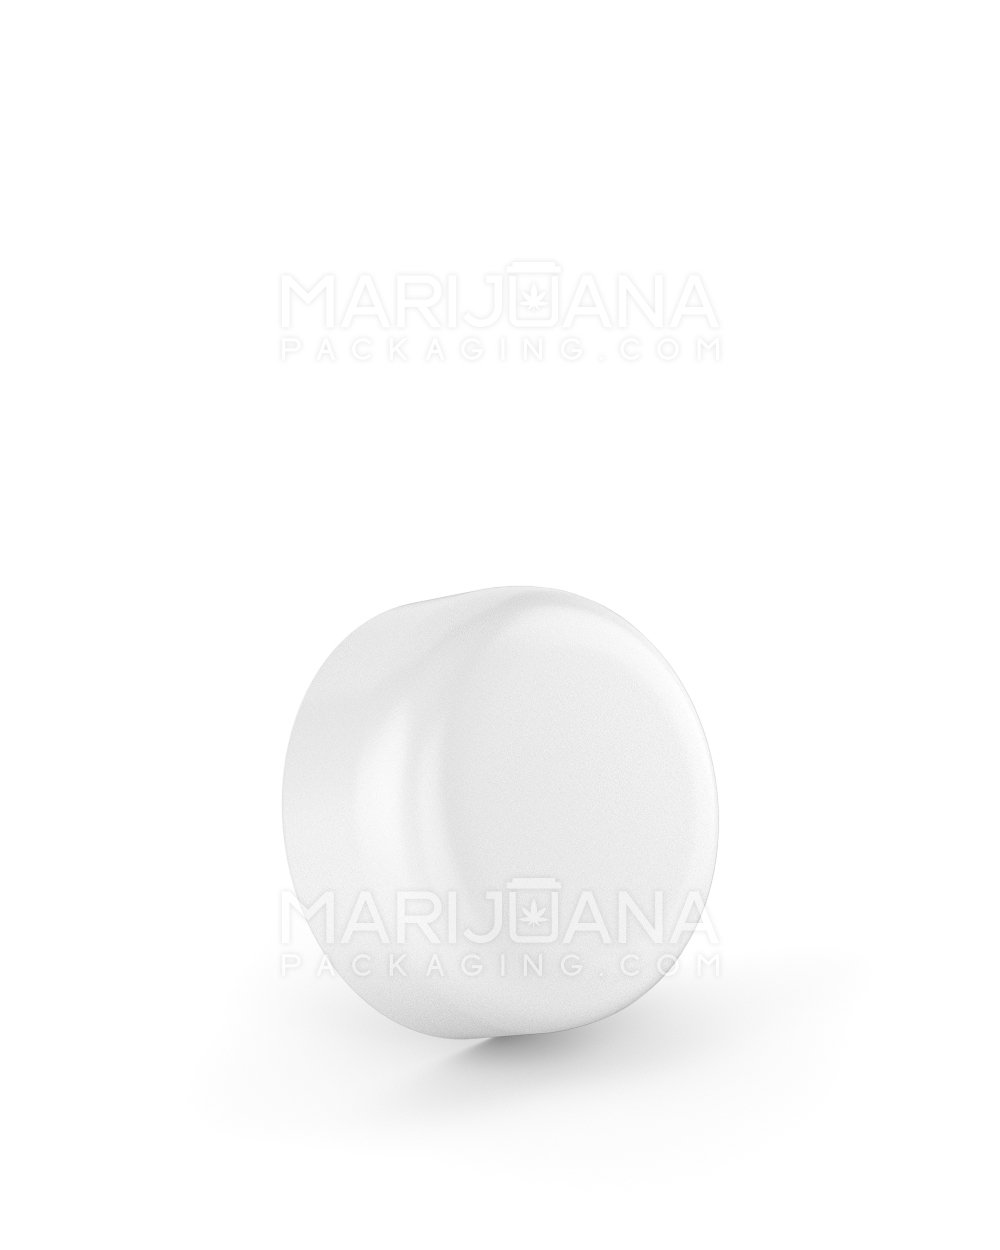 Child Resistant | Smooth Push Down & Turn Plastic Caps w/ Foam Liner | 29mm - Semi Gloss White - 504 Count - 1